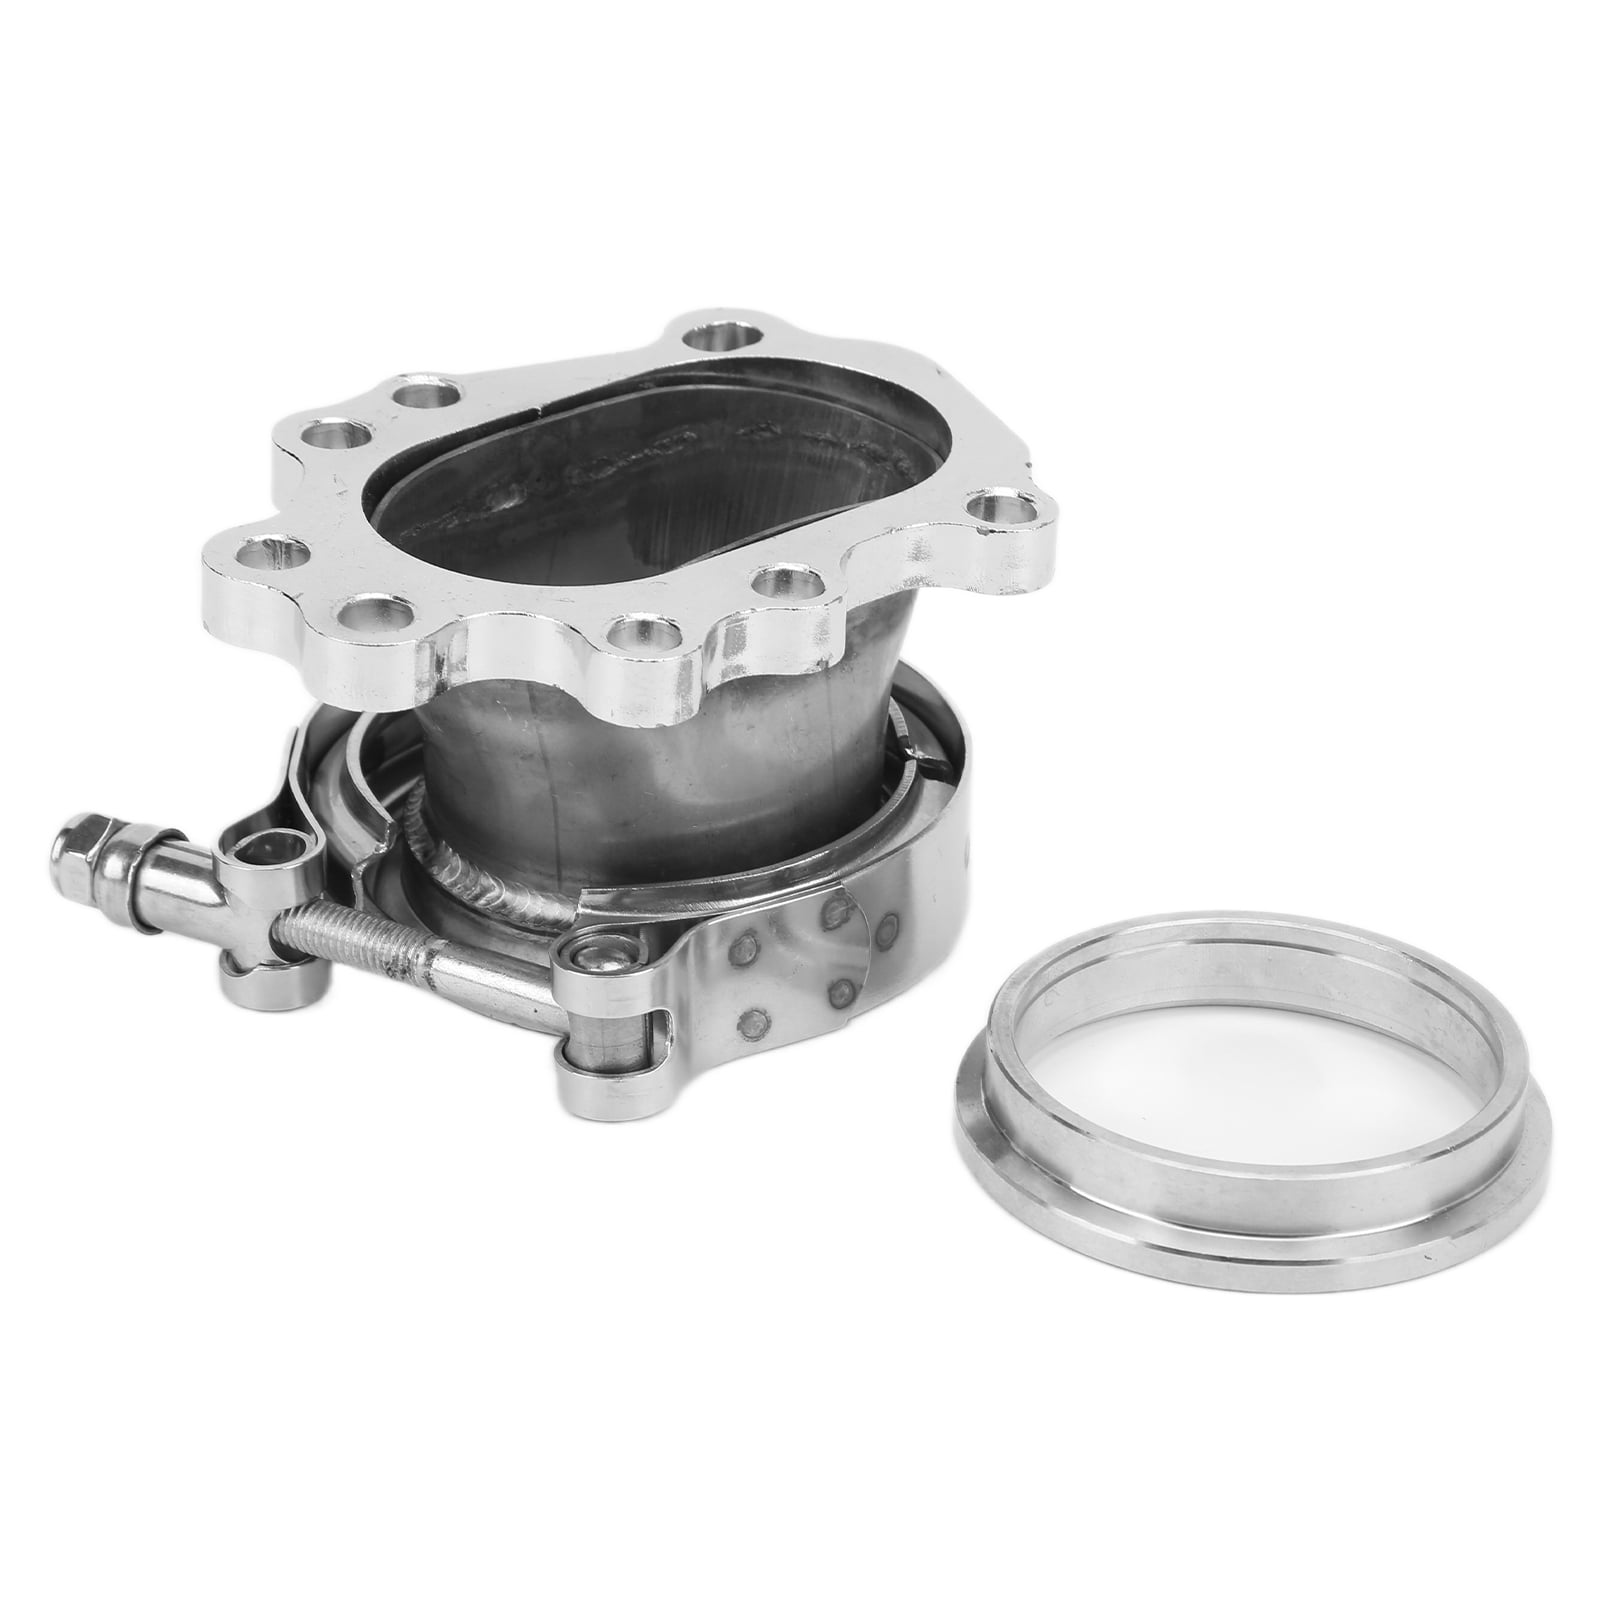 Exhaust Flange Conversion Turbo 2.5in 63mm Stainless Steel Exhaust Dump Flange Conversion V-Band Adapter for T25 GT25 GT28 